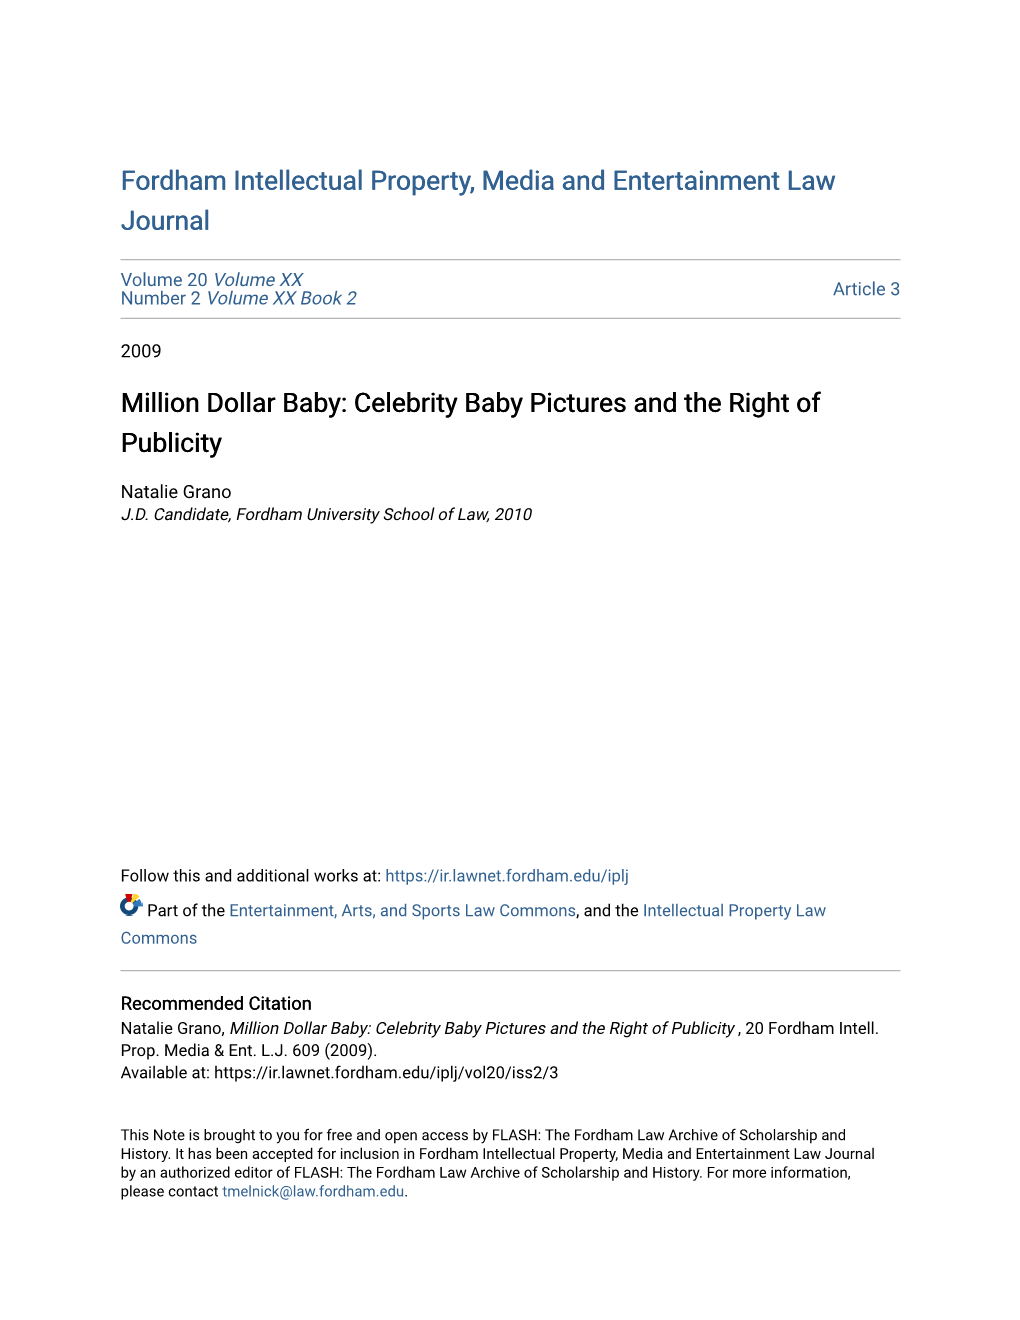 Million Dollar Baby: Celebrity Baby Pictures and the Right of Publicity